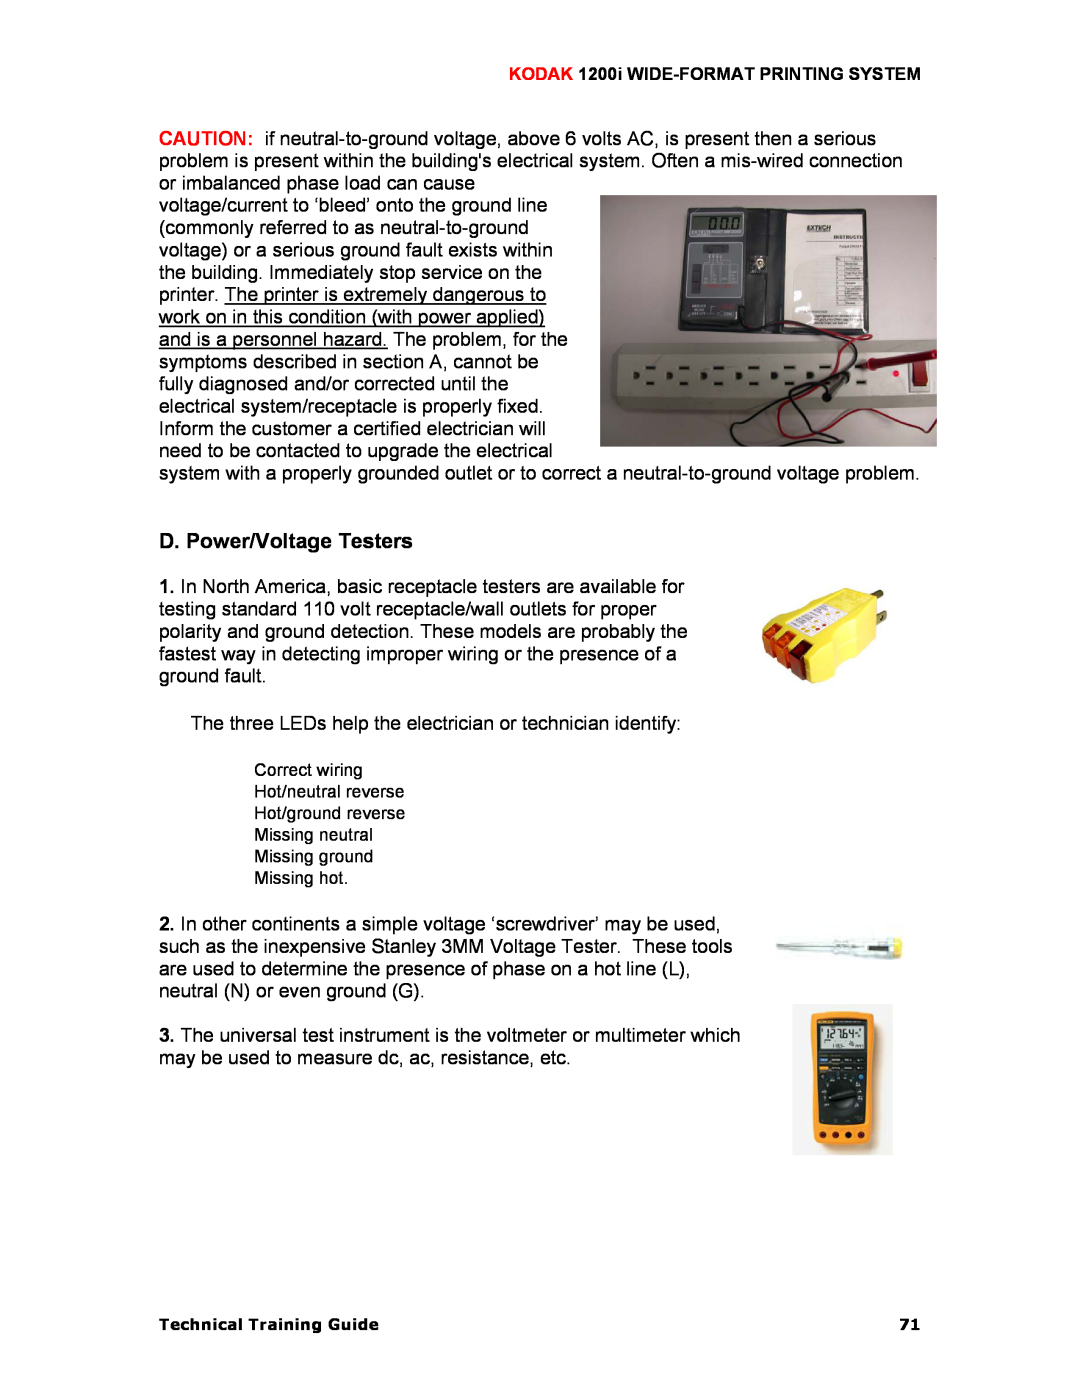 Kodak 1200I manual D. Power/Voltage Testers, Correct wiring Hot/neutral reverse, Missing hot 